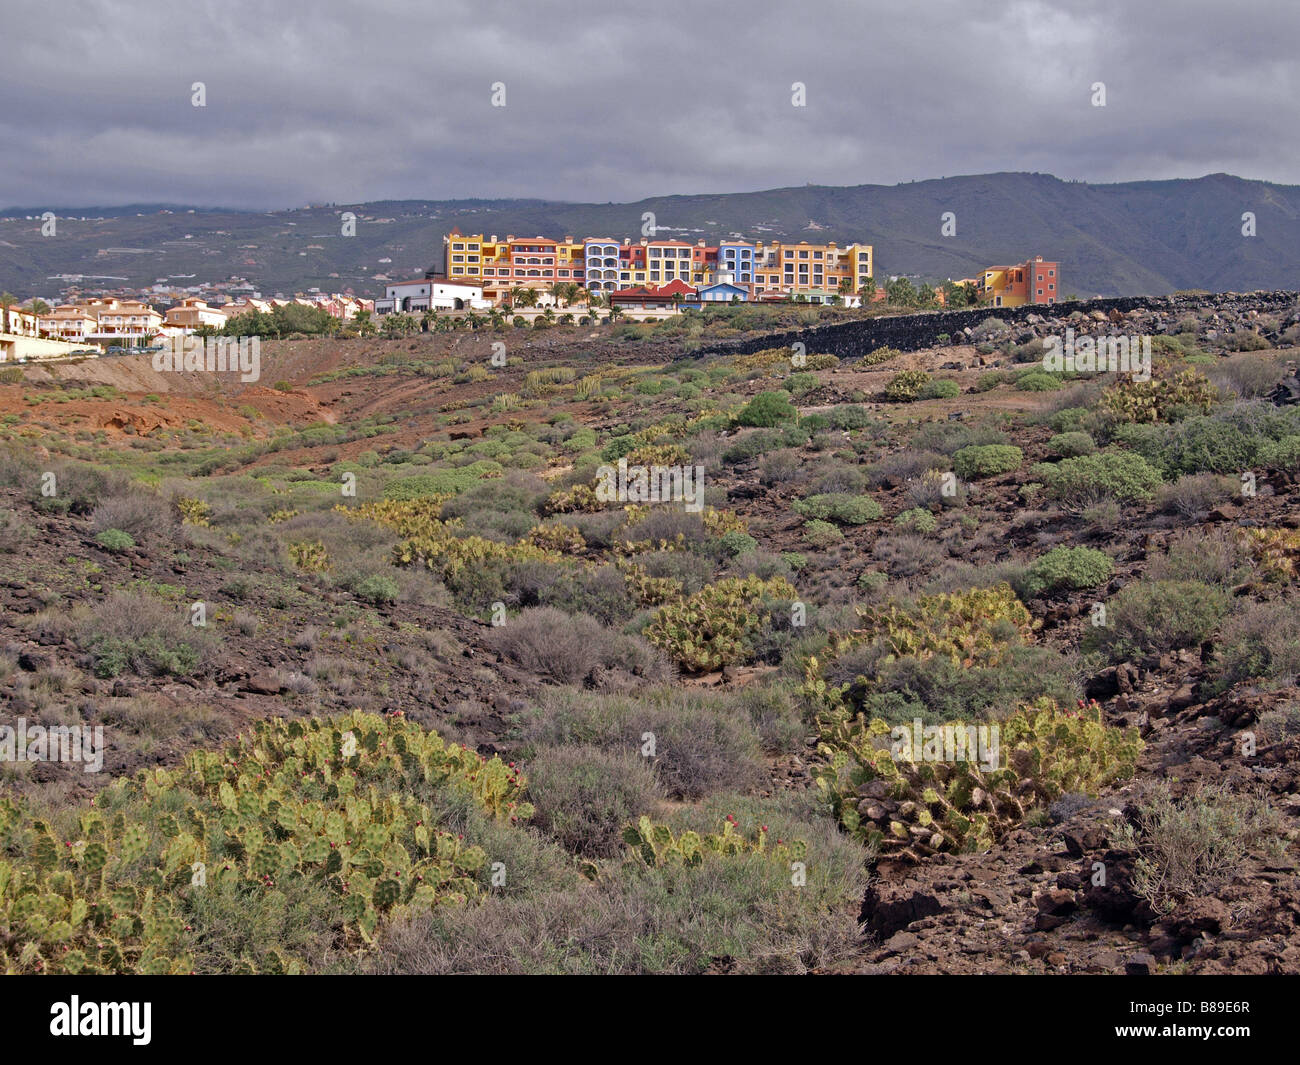 Colourful houses with scrub land in the forground at Playa Parasio, Costa Adeje, Tenerife. Stock Photo